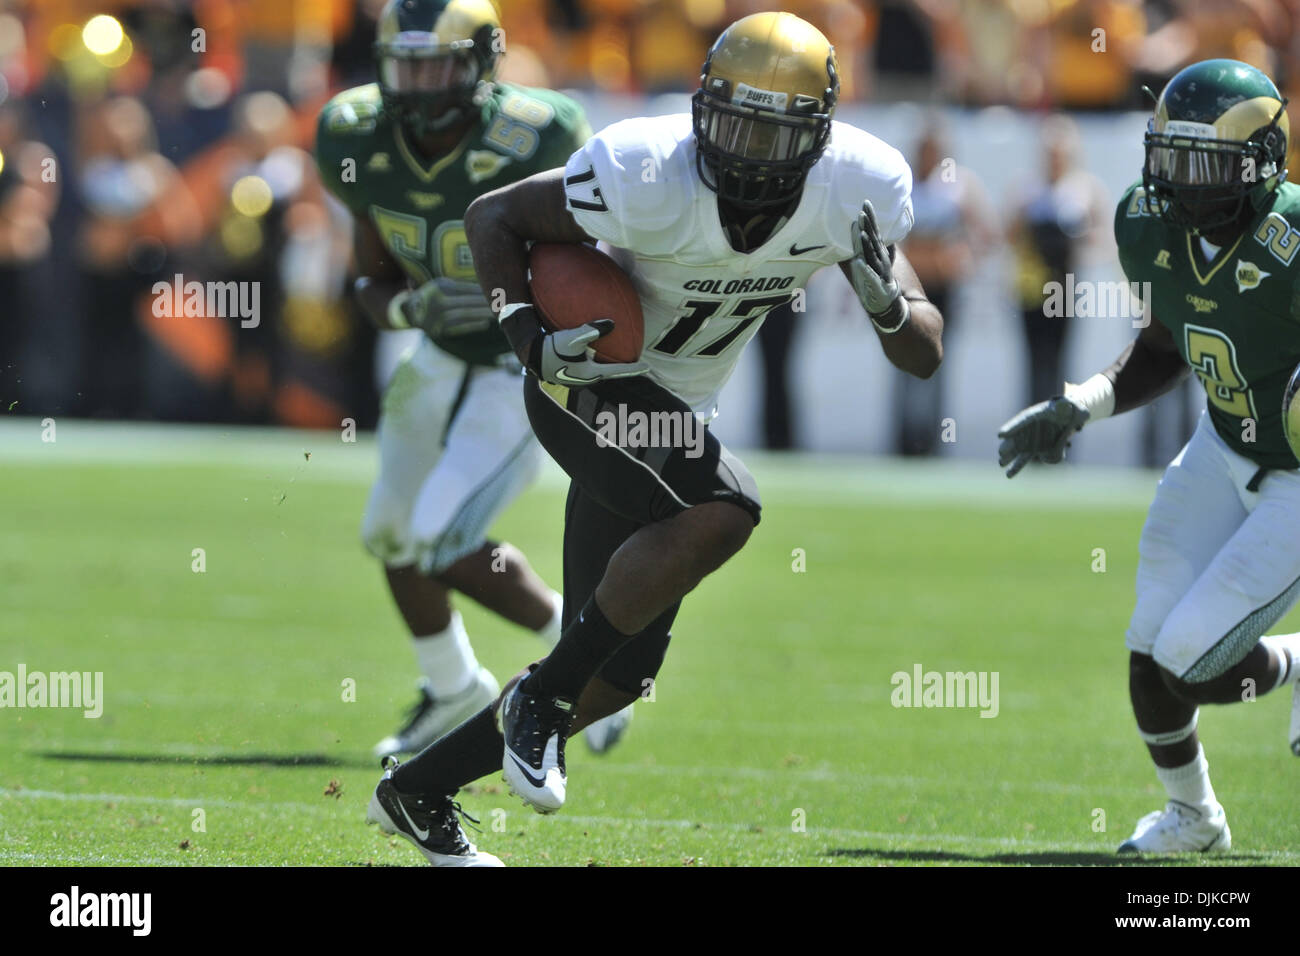 Sep. 04, 2010 - Denver, Colorado, United States of America - Colorado Buffaloes wide receiver Toney Clemons (17) runs with the ball during Rocky Mountain Showdown game between the Colorado State Rams and the Colorado Buffaloes at Invesco Field at Mile High. Colorado defeated Colorado State by a score of 24-3. (Credit Image: © Andrew Fielding/Southcreek Global/ZUMApress.com) Stock Photo